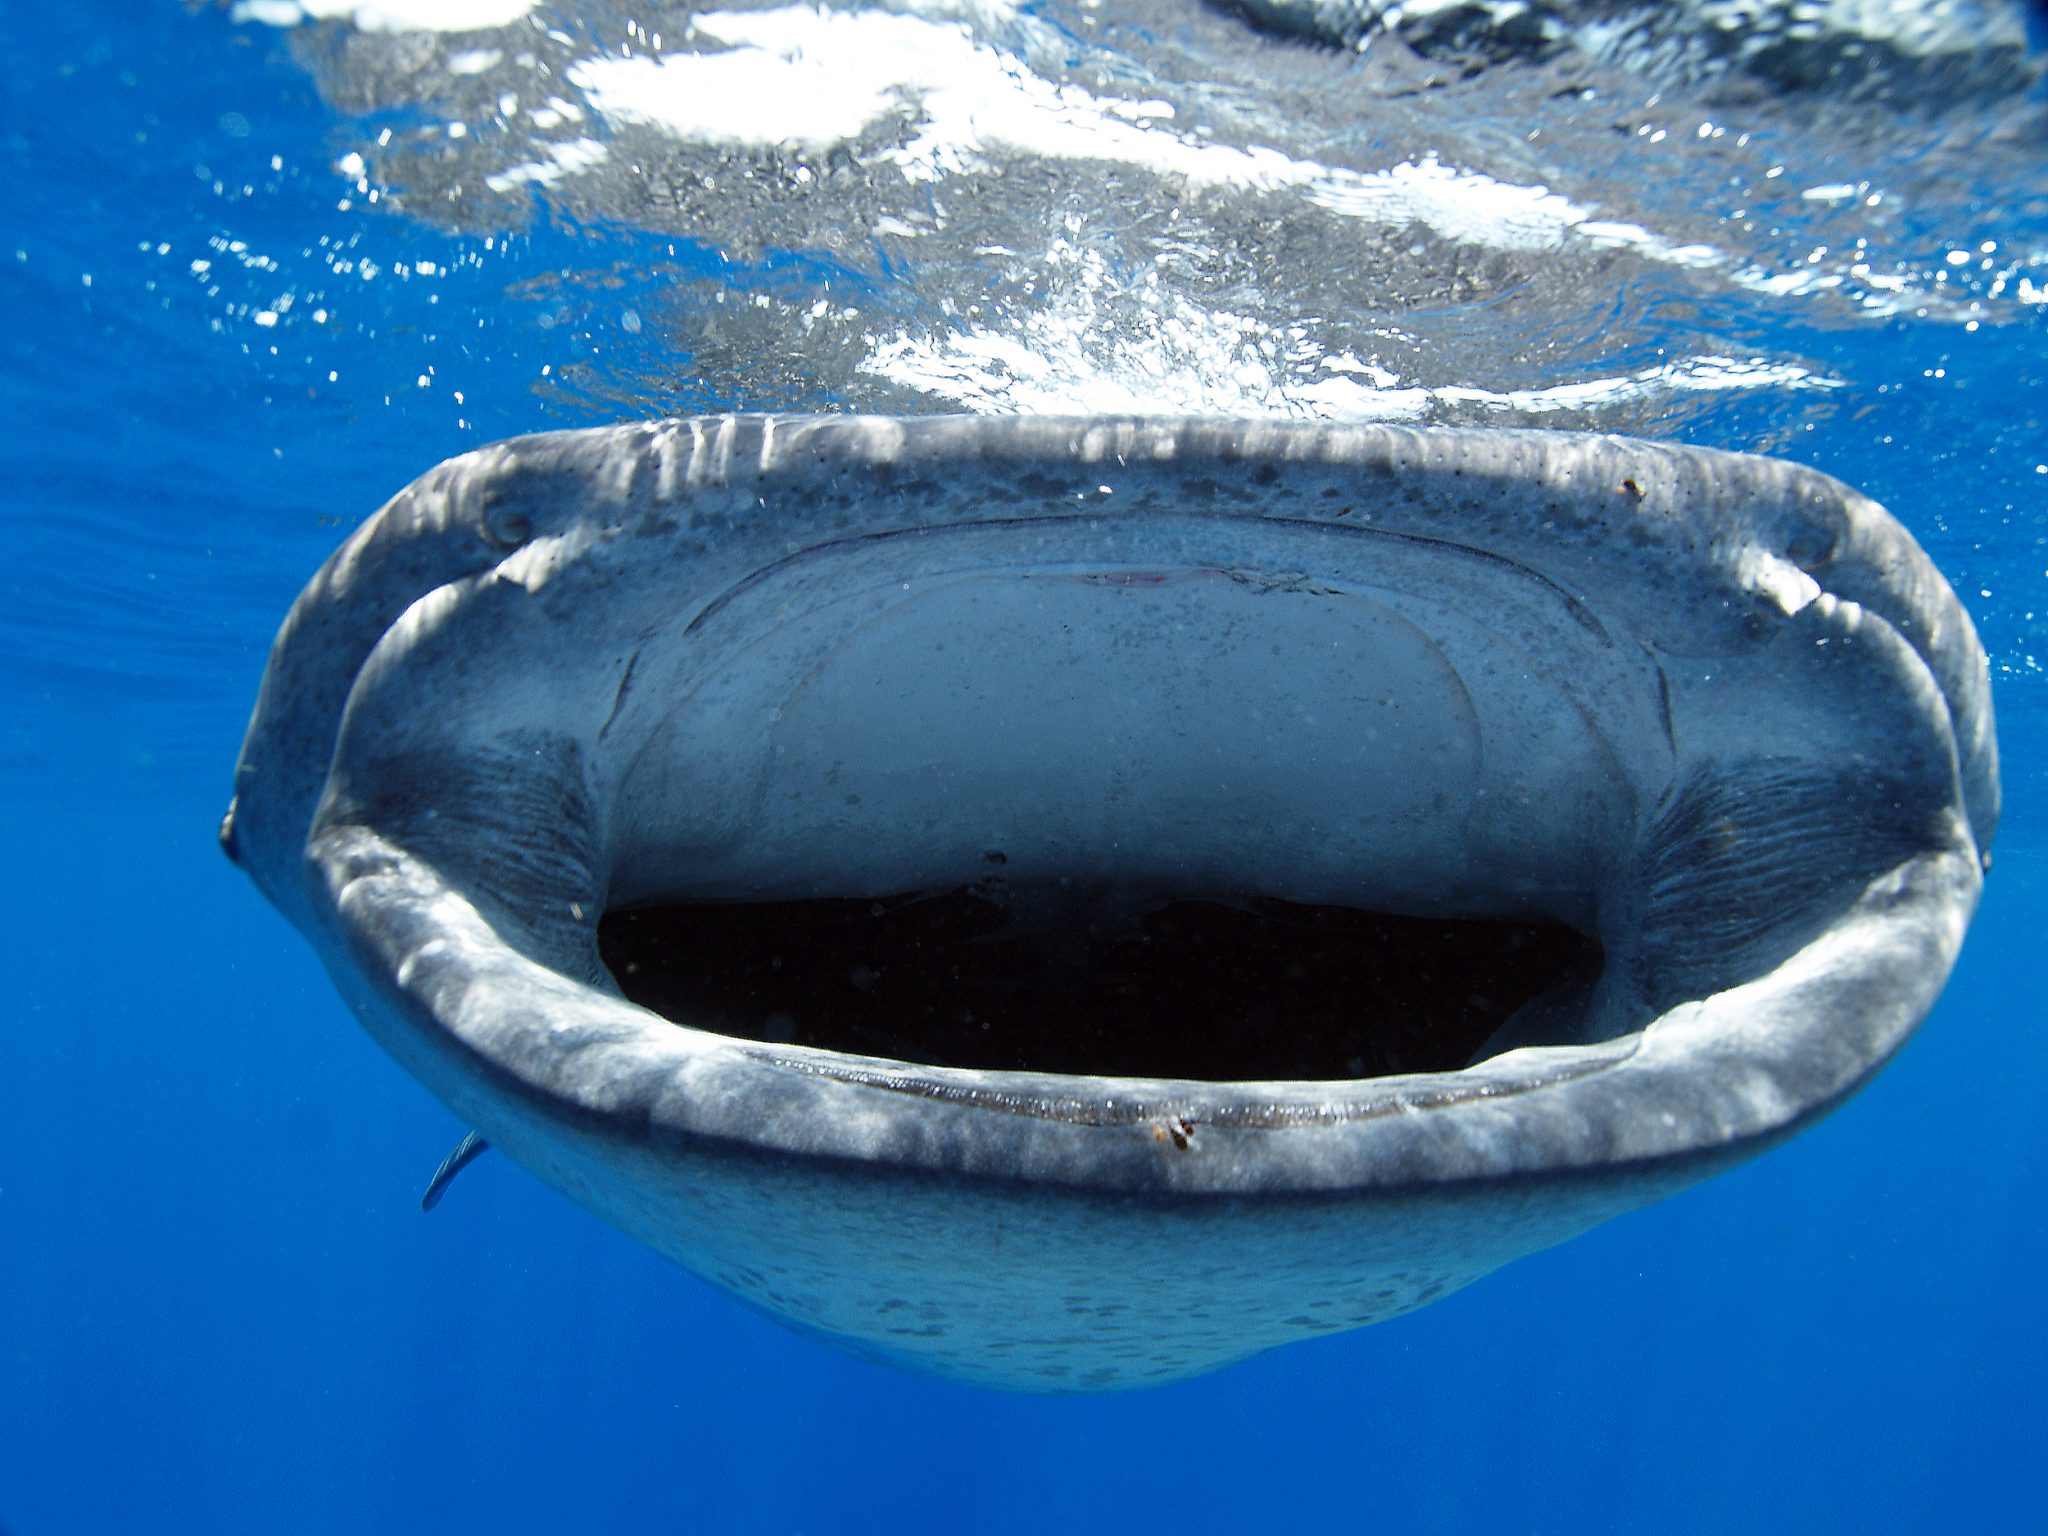 A close-up view of the inside of a whale shark's giant mouth, which they use to filter feed plankton and krill